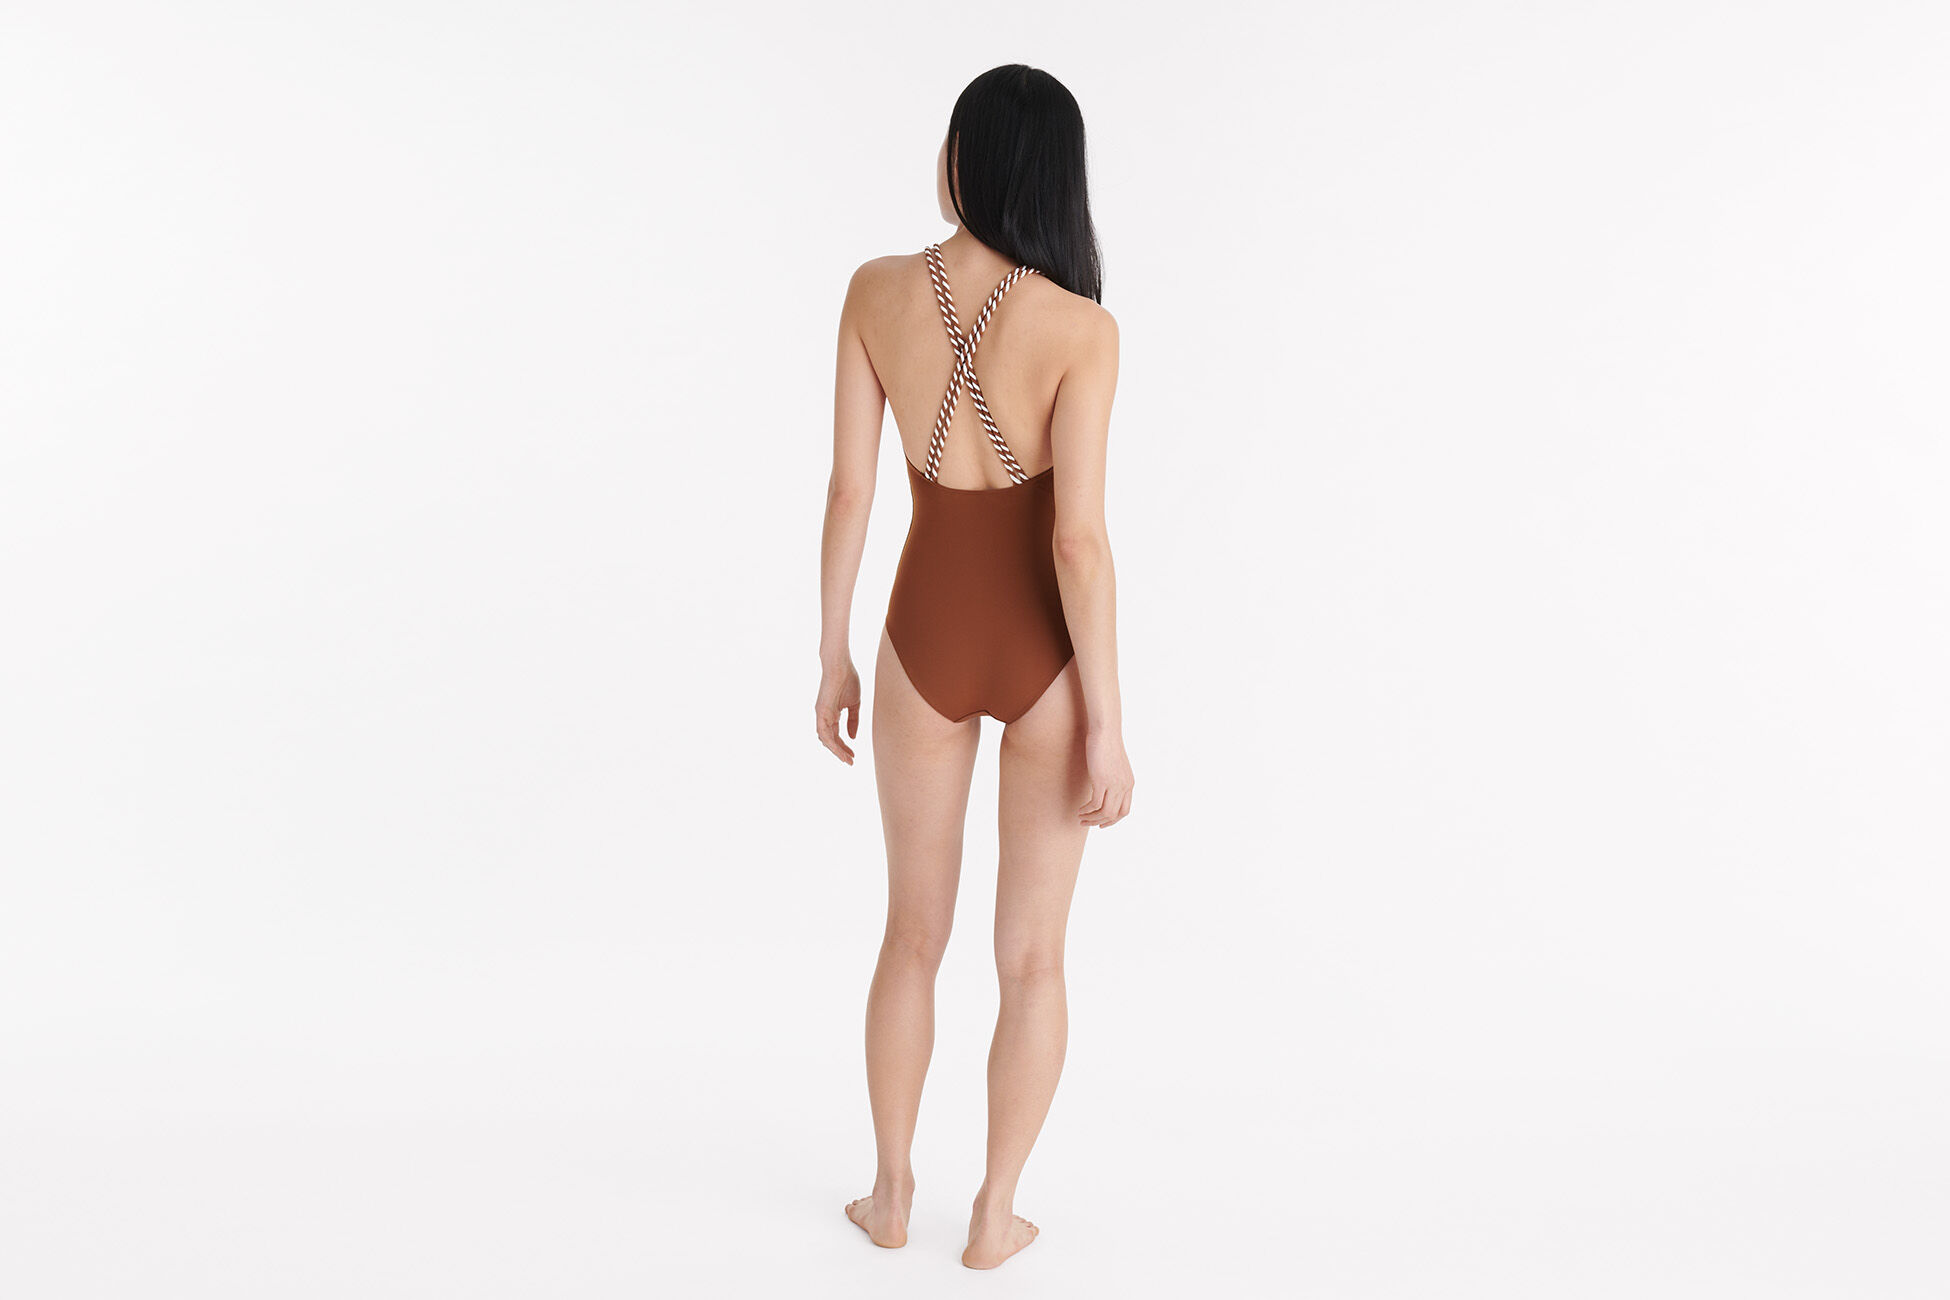 Pirouette Sophisticated one-piece standard view NaN